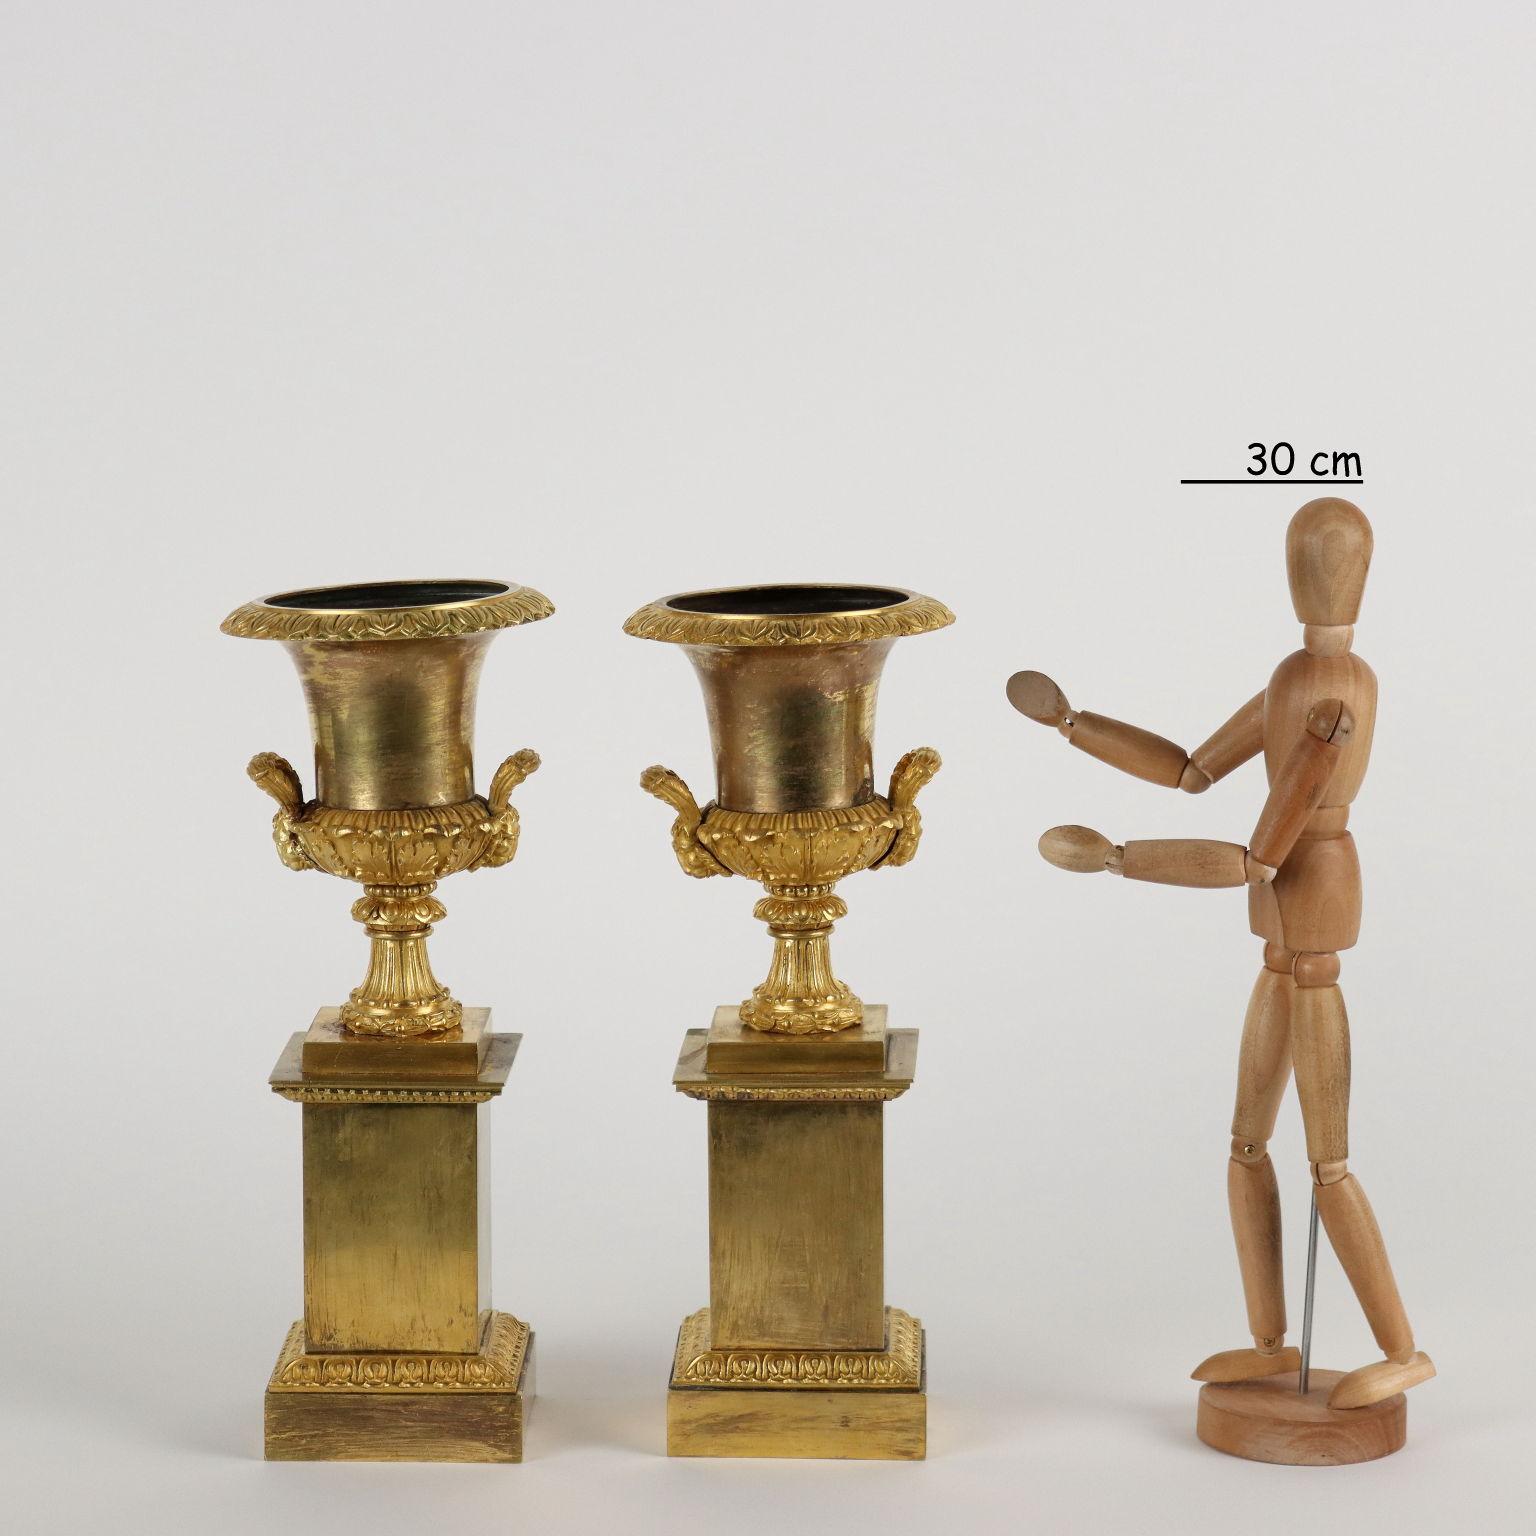 Pair of Medici vases in gilded and chiseled bronze with plinth base decorated with vegetable and Greek motifs. The two vases have two terminal handles with lion heads.